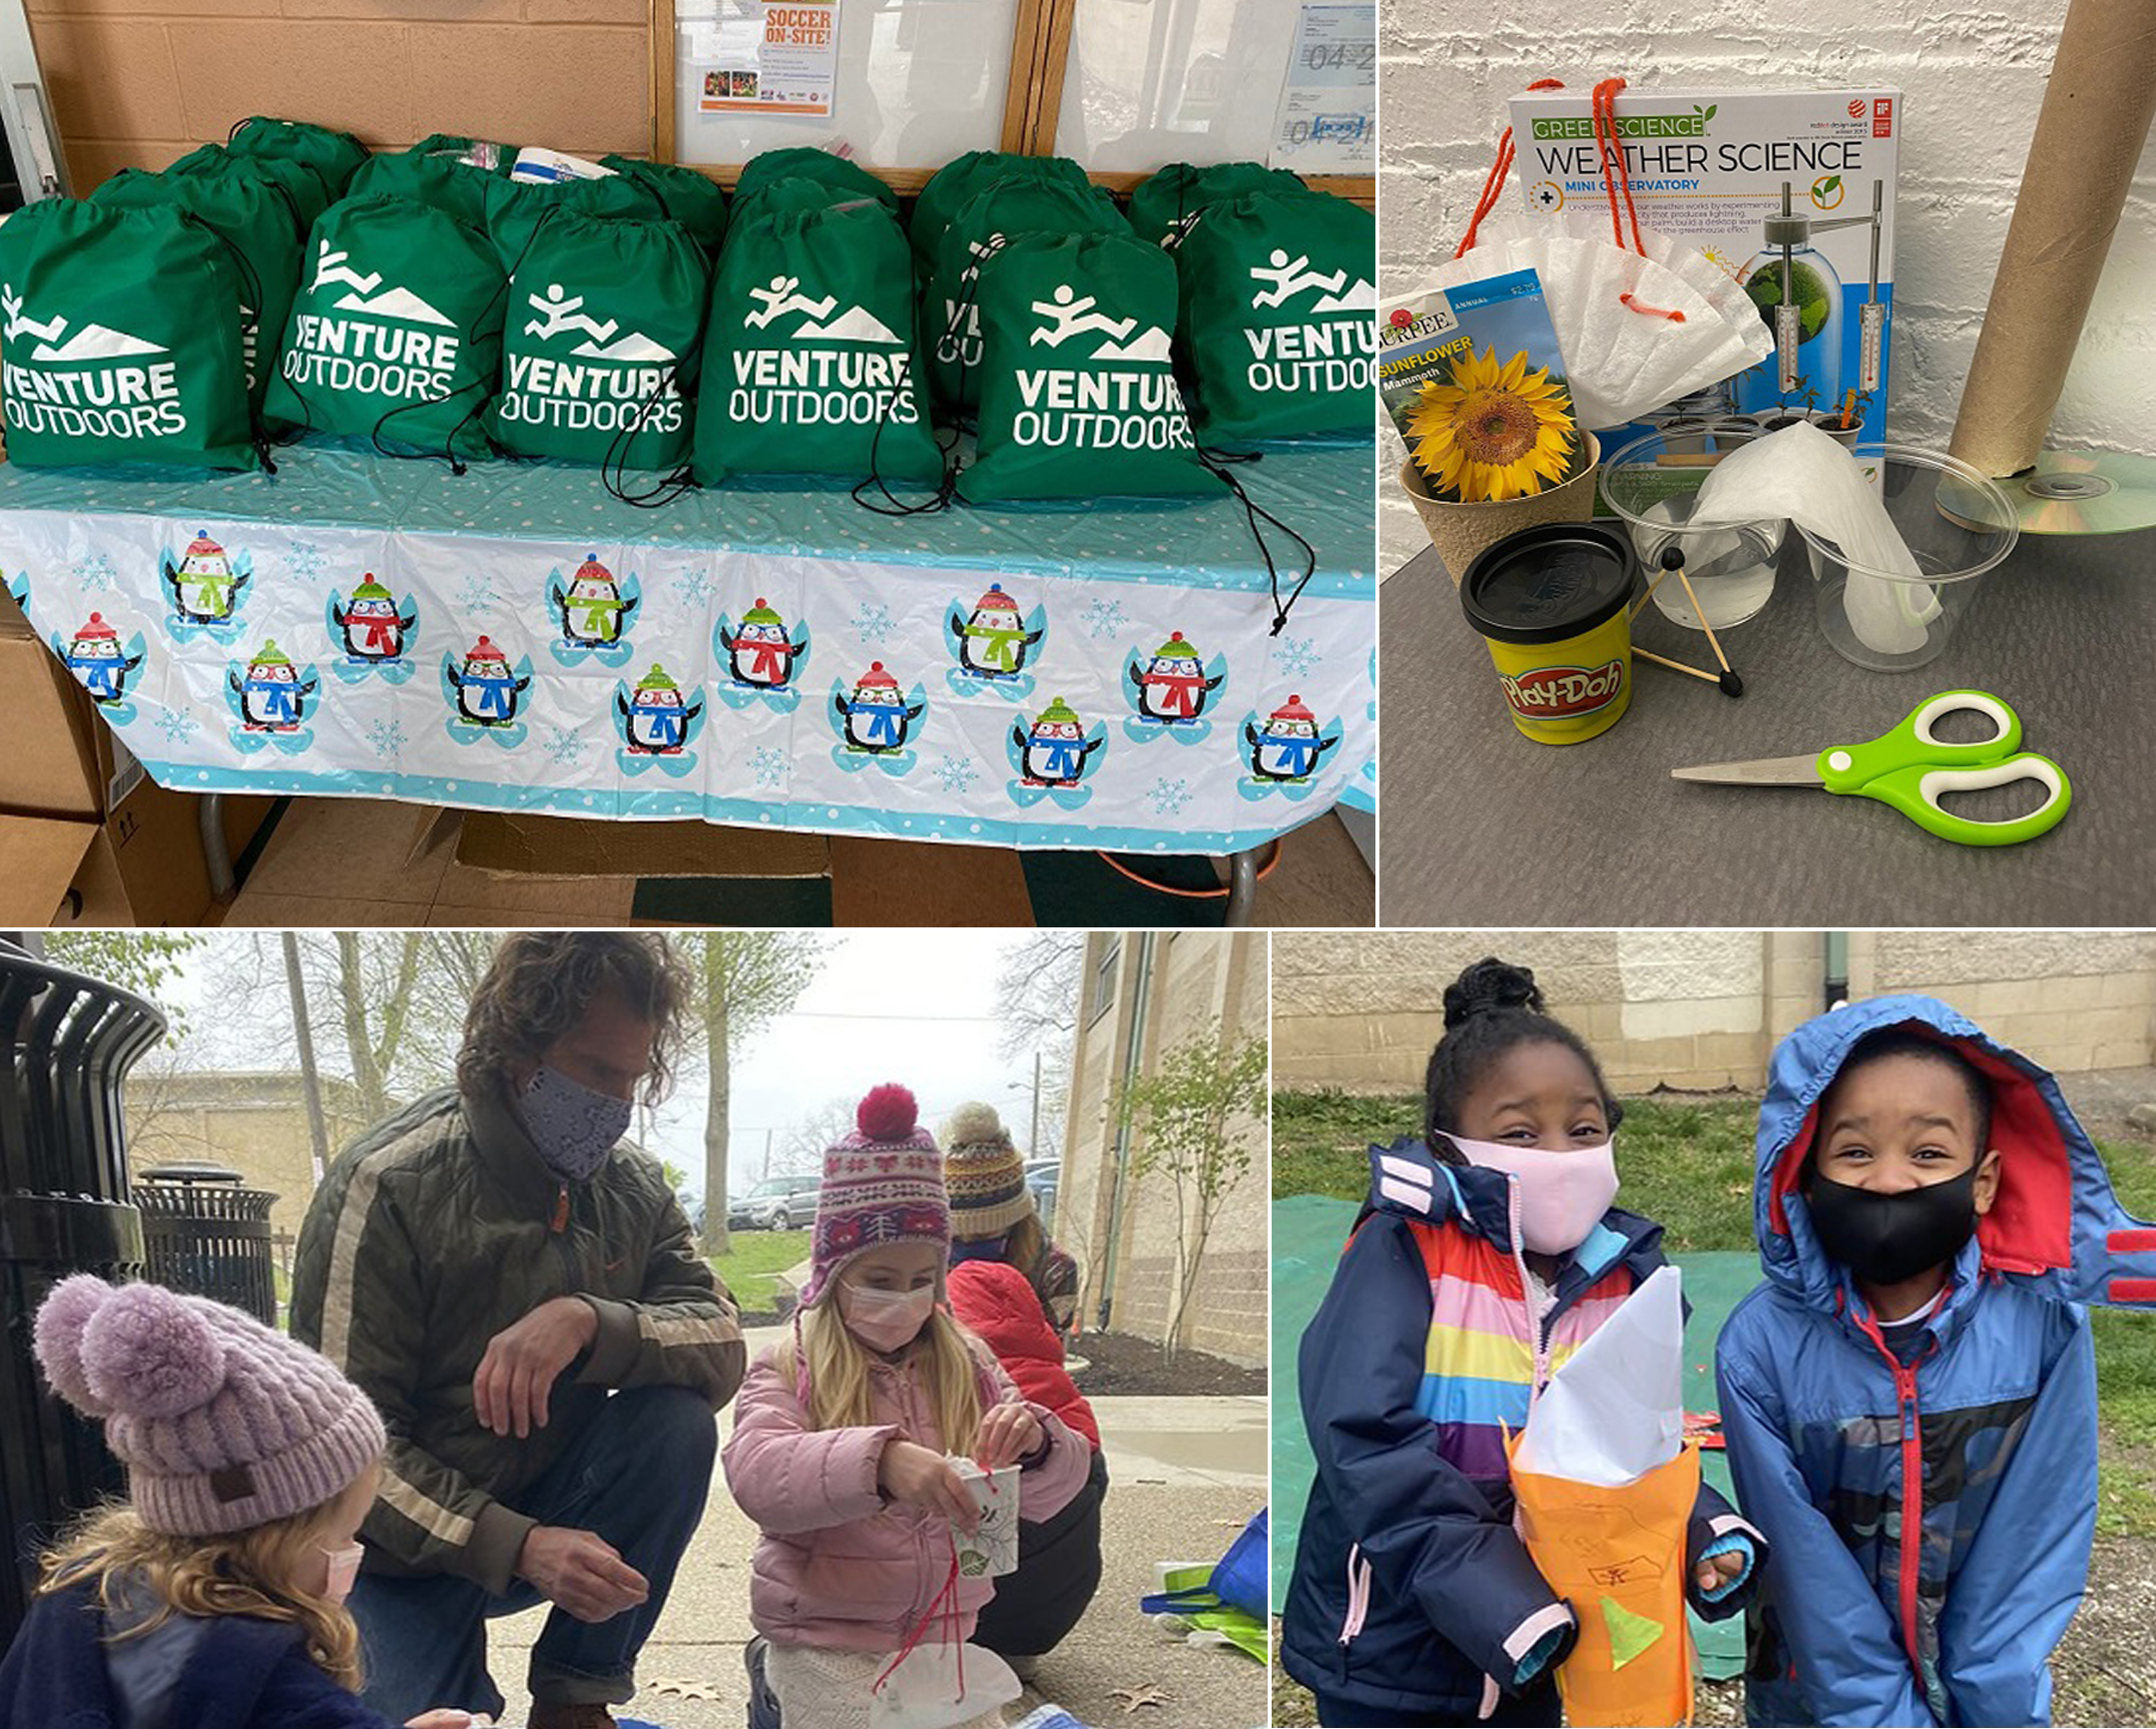 Four images, clockwise from top left: table stocked with green Venture Outdoors bags, the contents of the bags (including scissors, play-doh, seeds, and craft materials), two young black children in coats and face masks, and a teacher working with two young white children on a STEM project